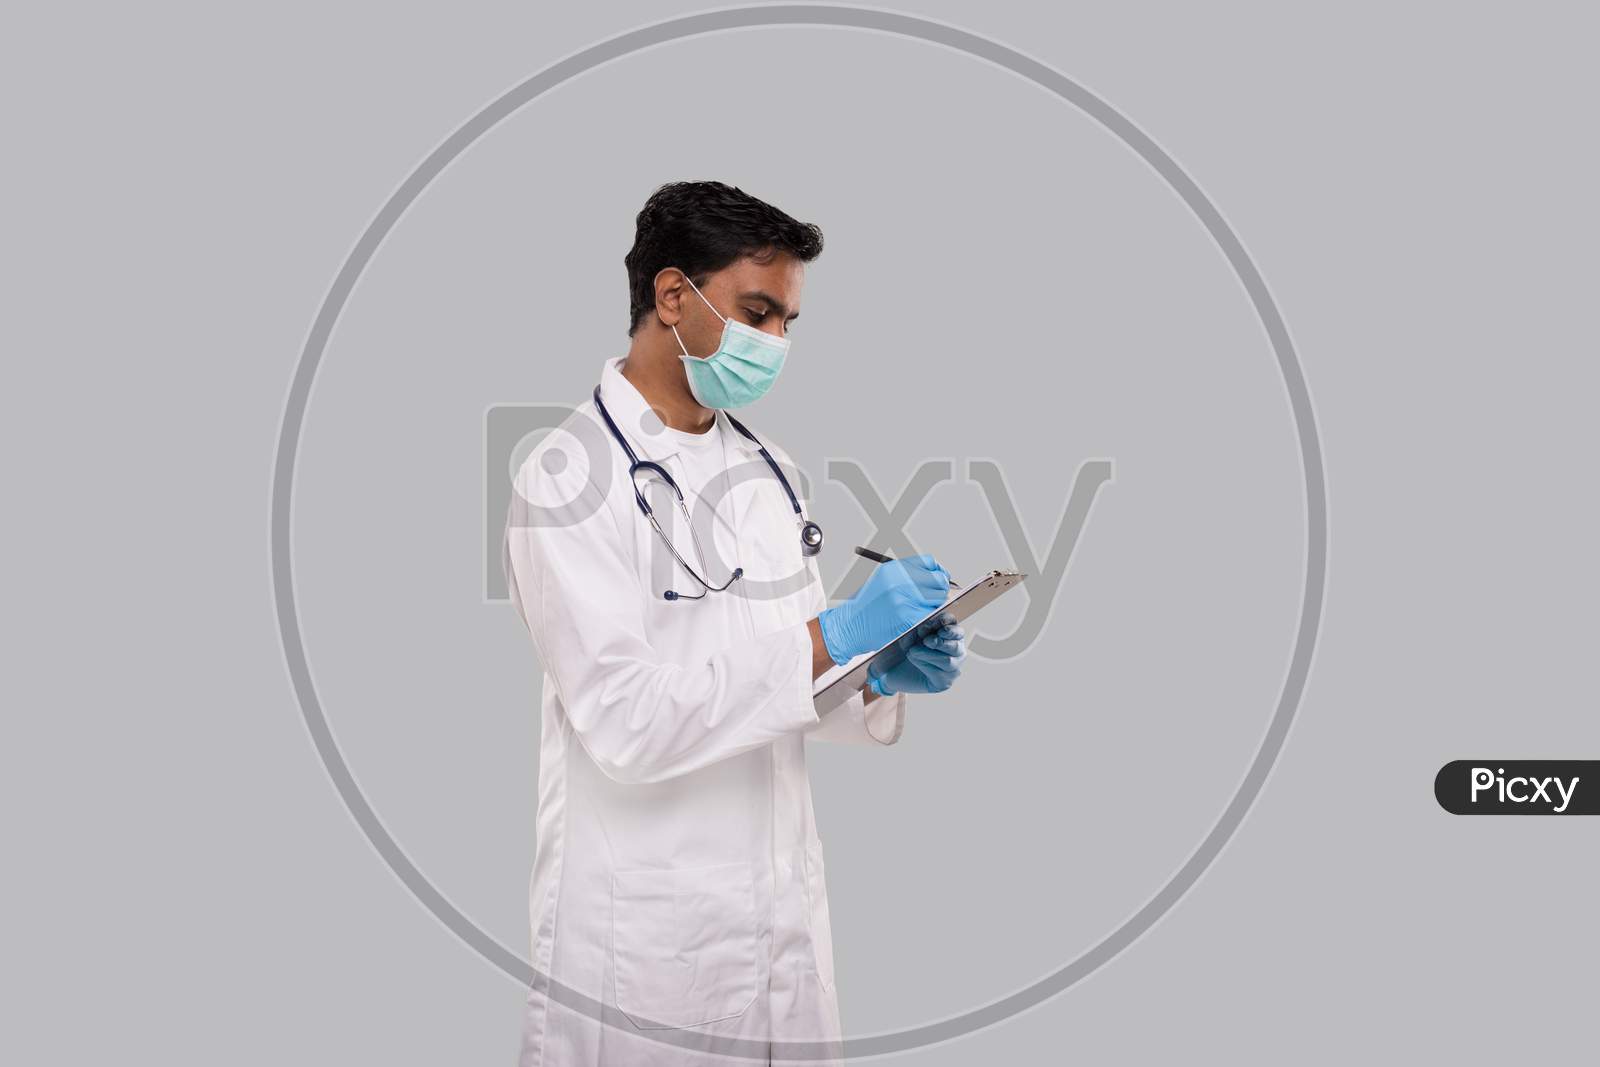 Doctor Writing In Clipboard Wearing Medical Mask And Gloves. Indian Man Doctor Clipboard Isolated